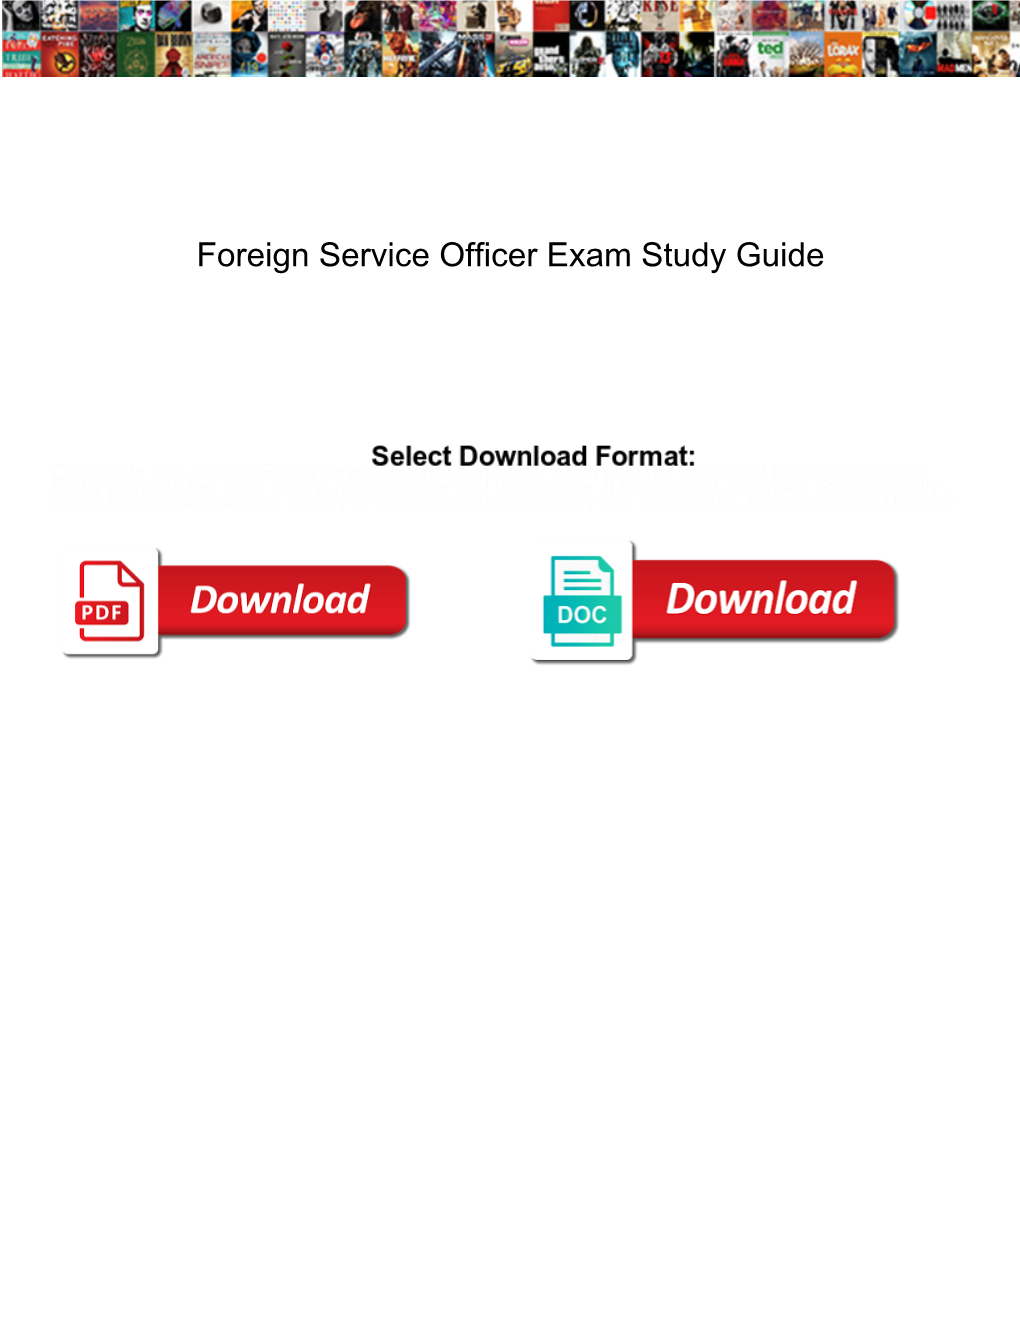 Foreign Service Officer Exam Study Guide